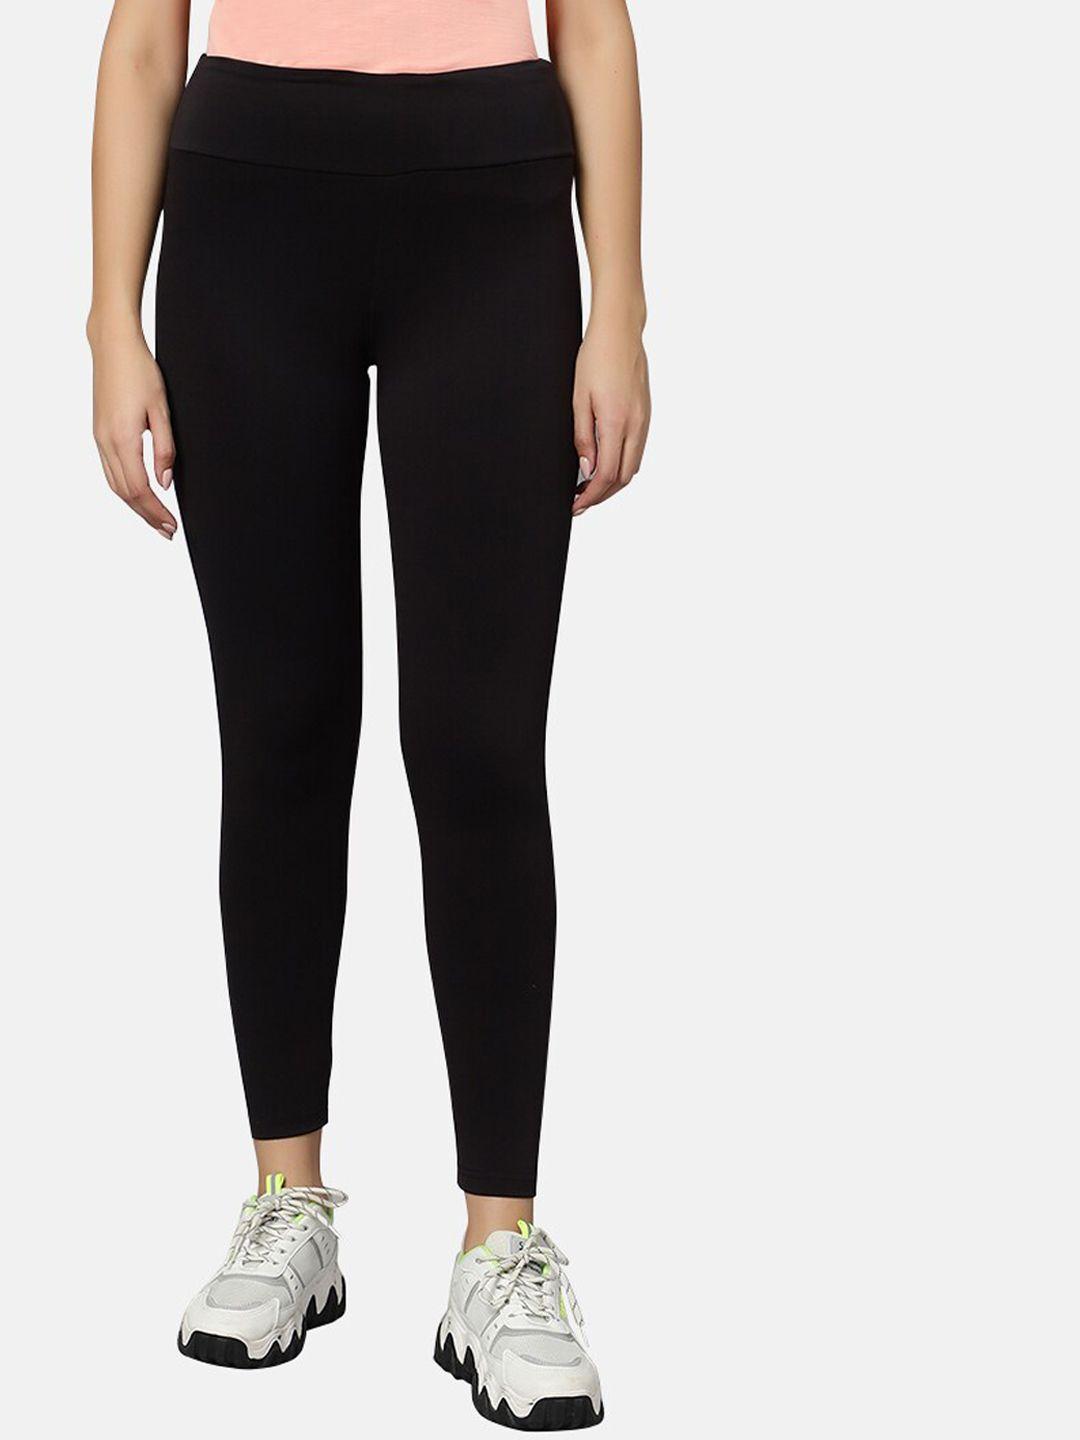 omtex-ankle-length-high-rise-yoga-tights